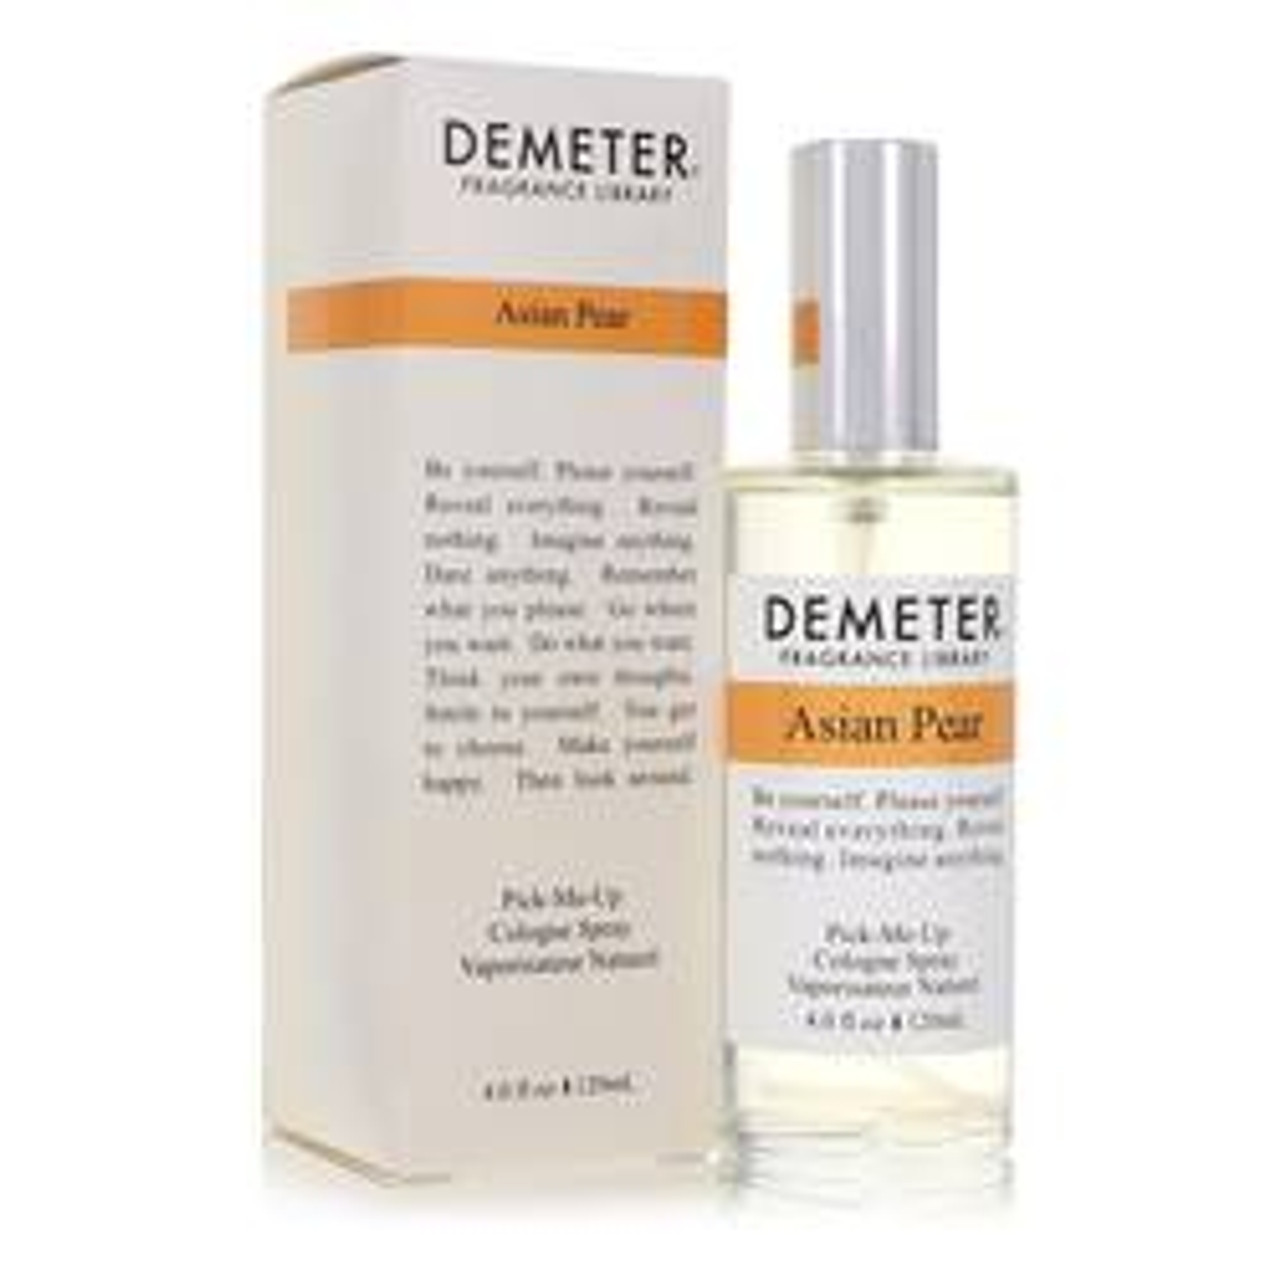 Demeter Asian Pear Cologne Perfume By Demeter Cologne Spray (Unisex) 4 oz for Women - [From 79.50 - Choose pk Qty ] - *Ships from Miami